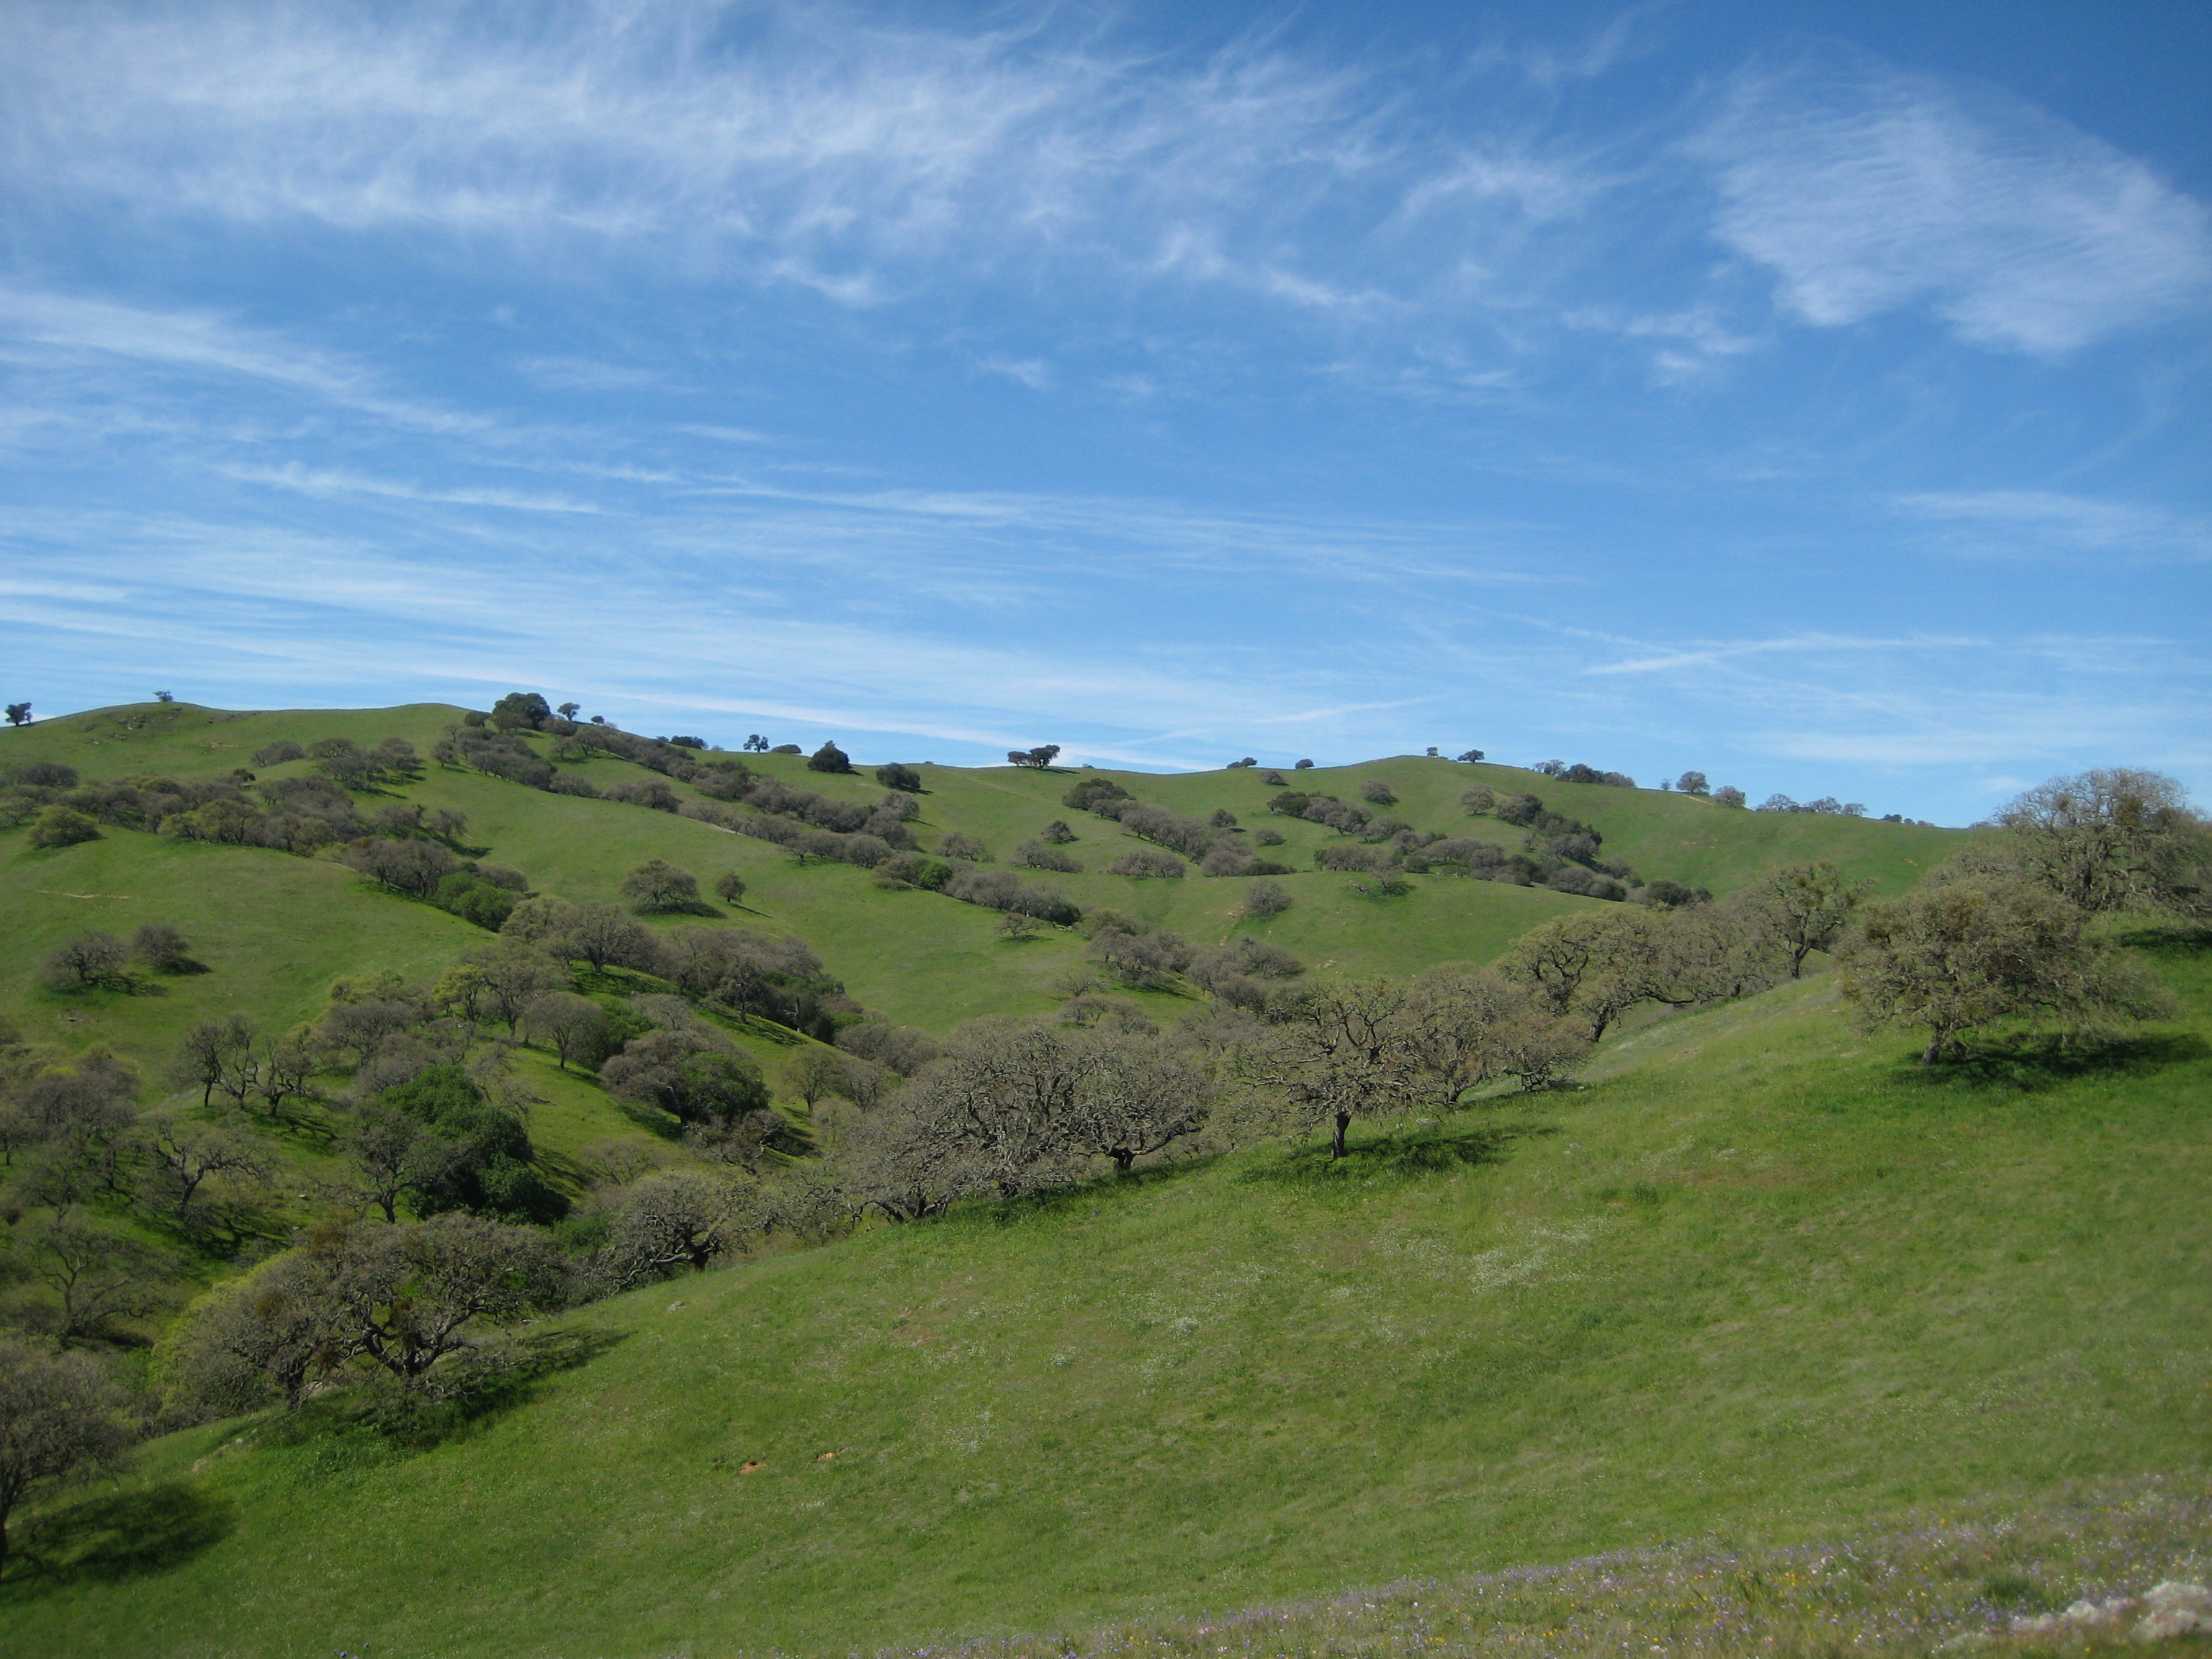 Trees traverse the hills in Pacheco State Park, California.